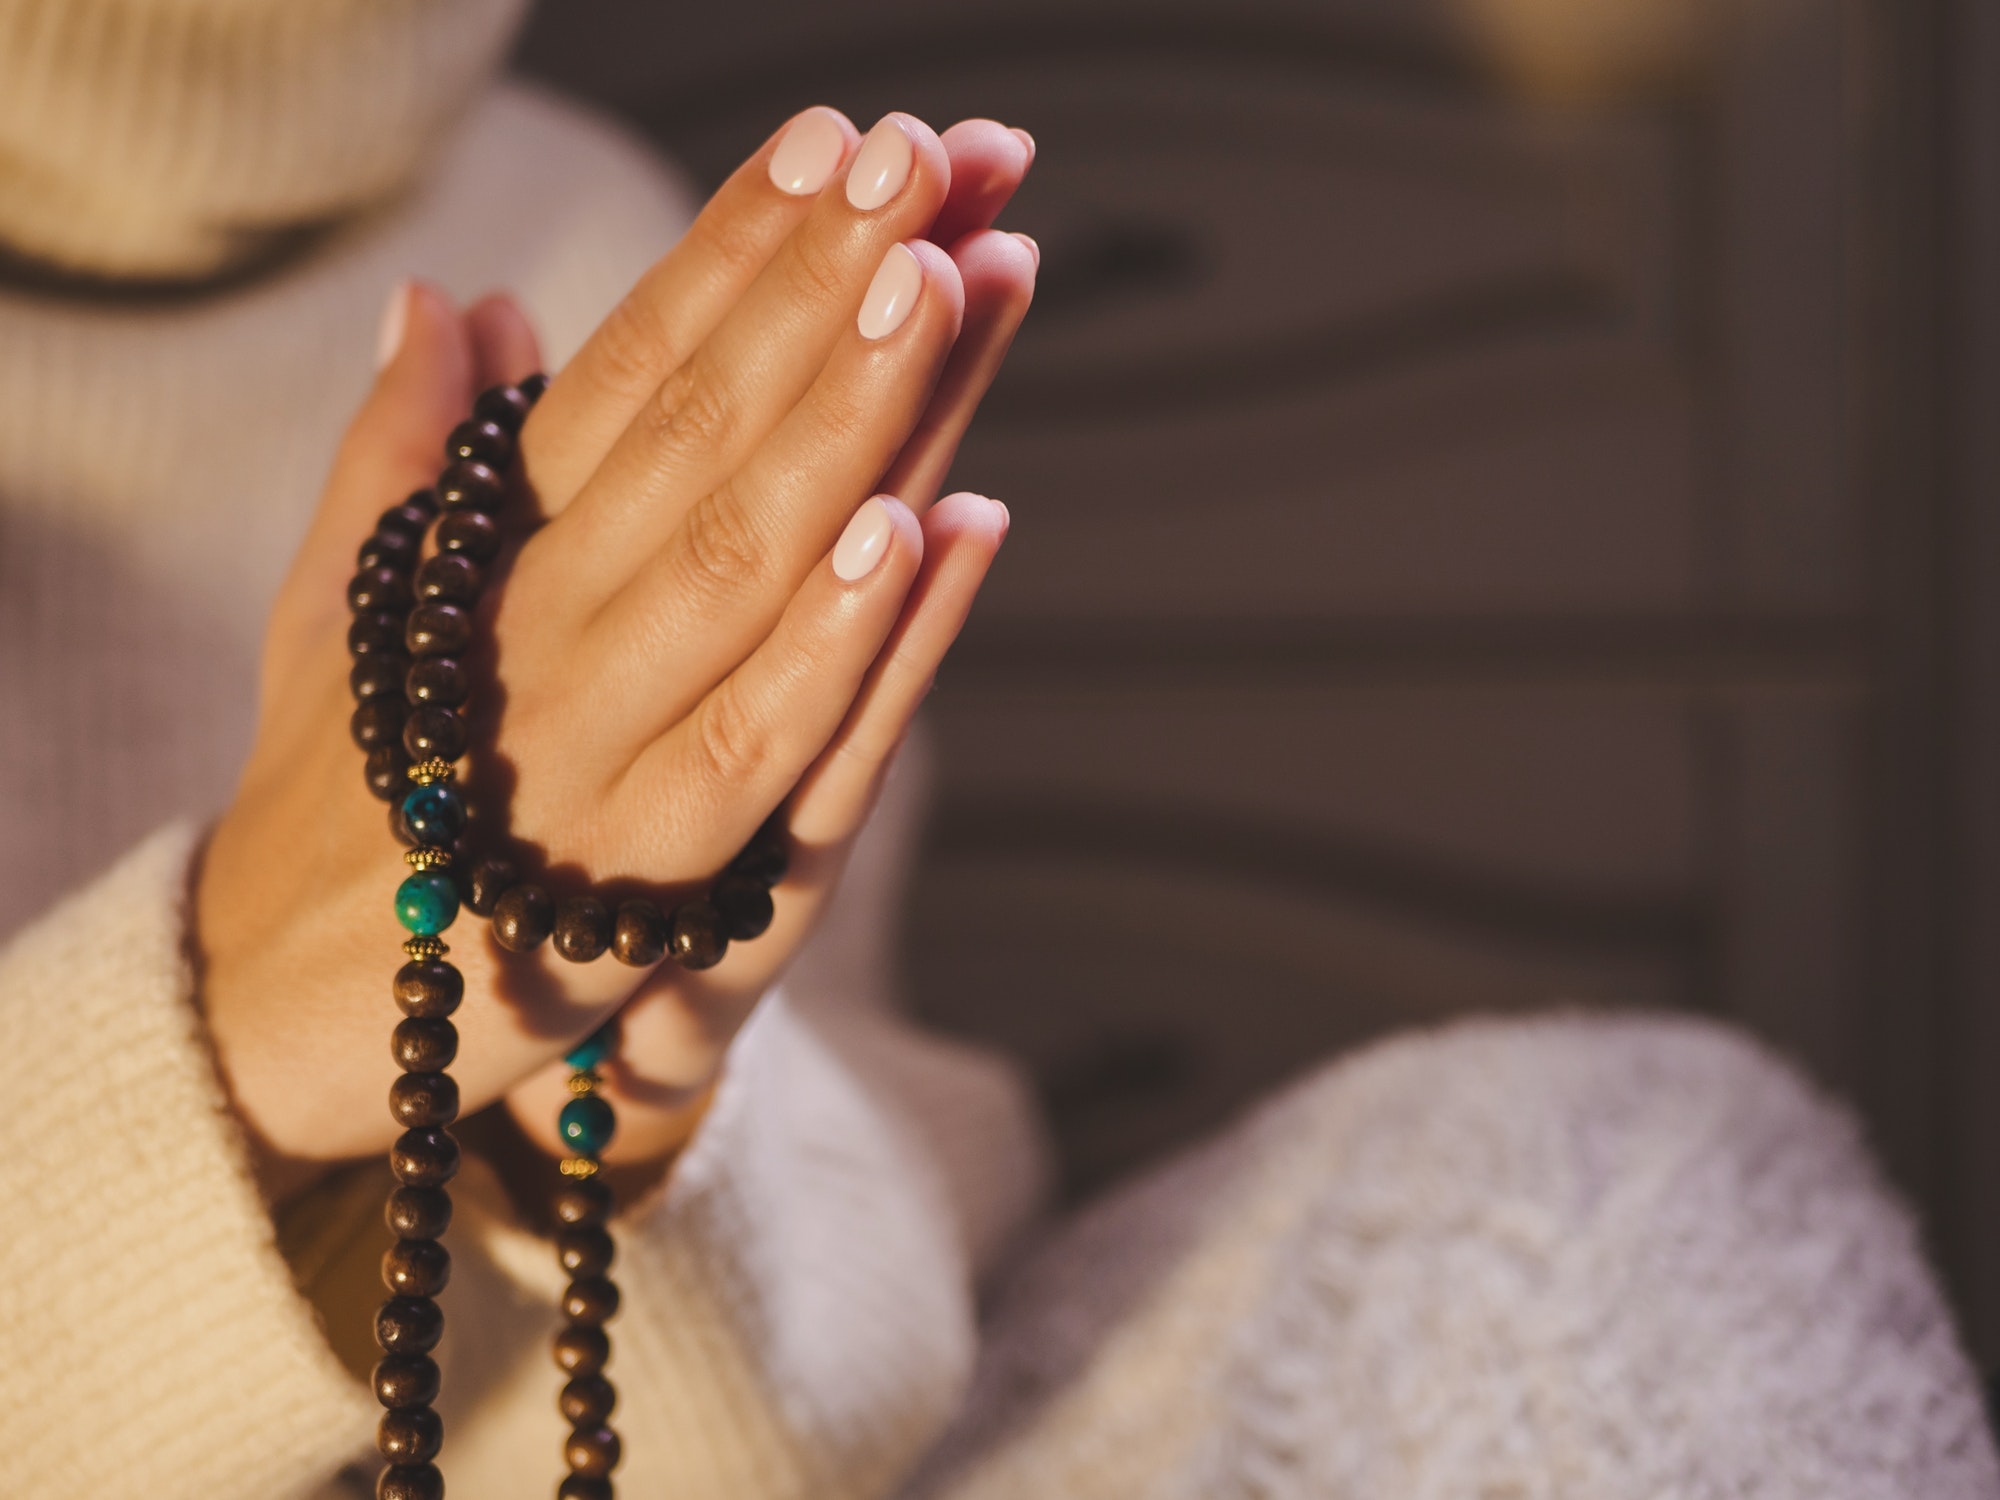 Woman holding mala beads in hand. Counting beads and reading mantra